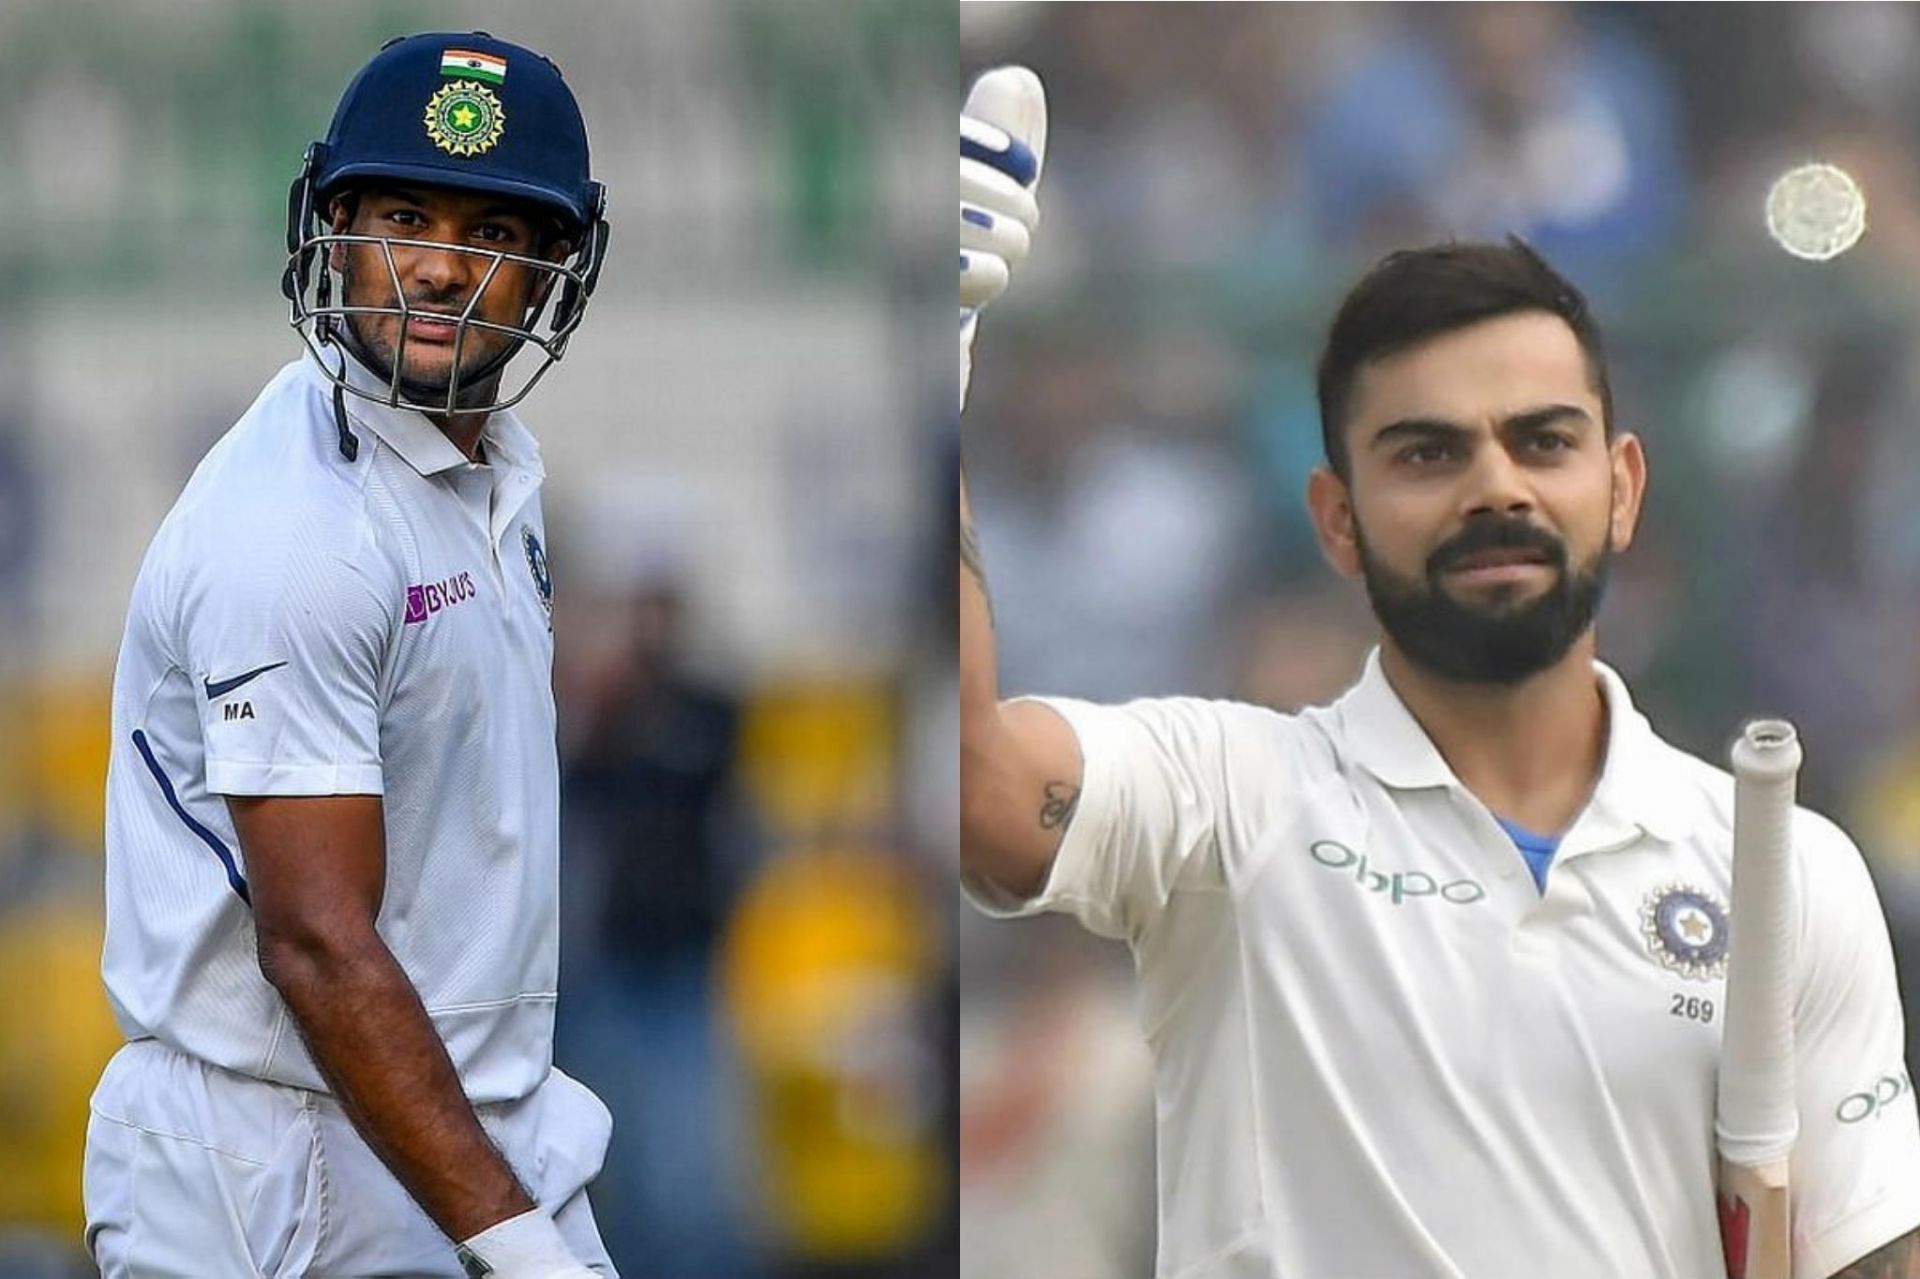 Virat Kohli is likely to replace Mayank Agarwal for the second Test against New Zealand